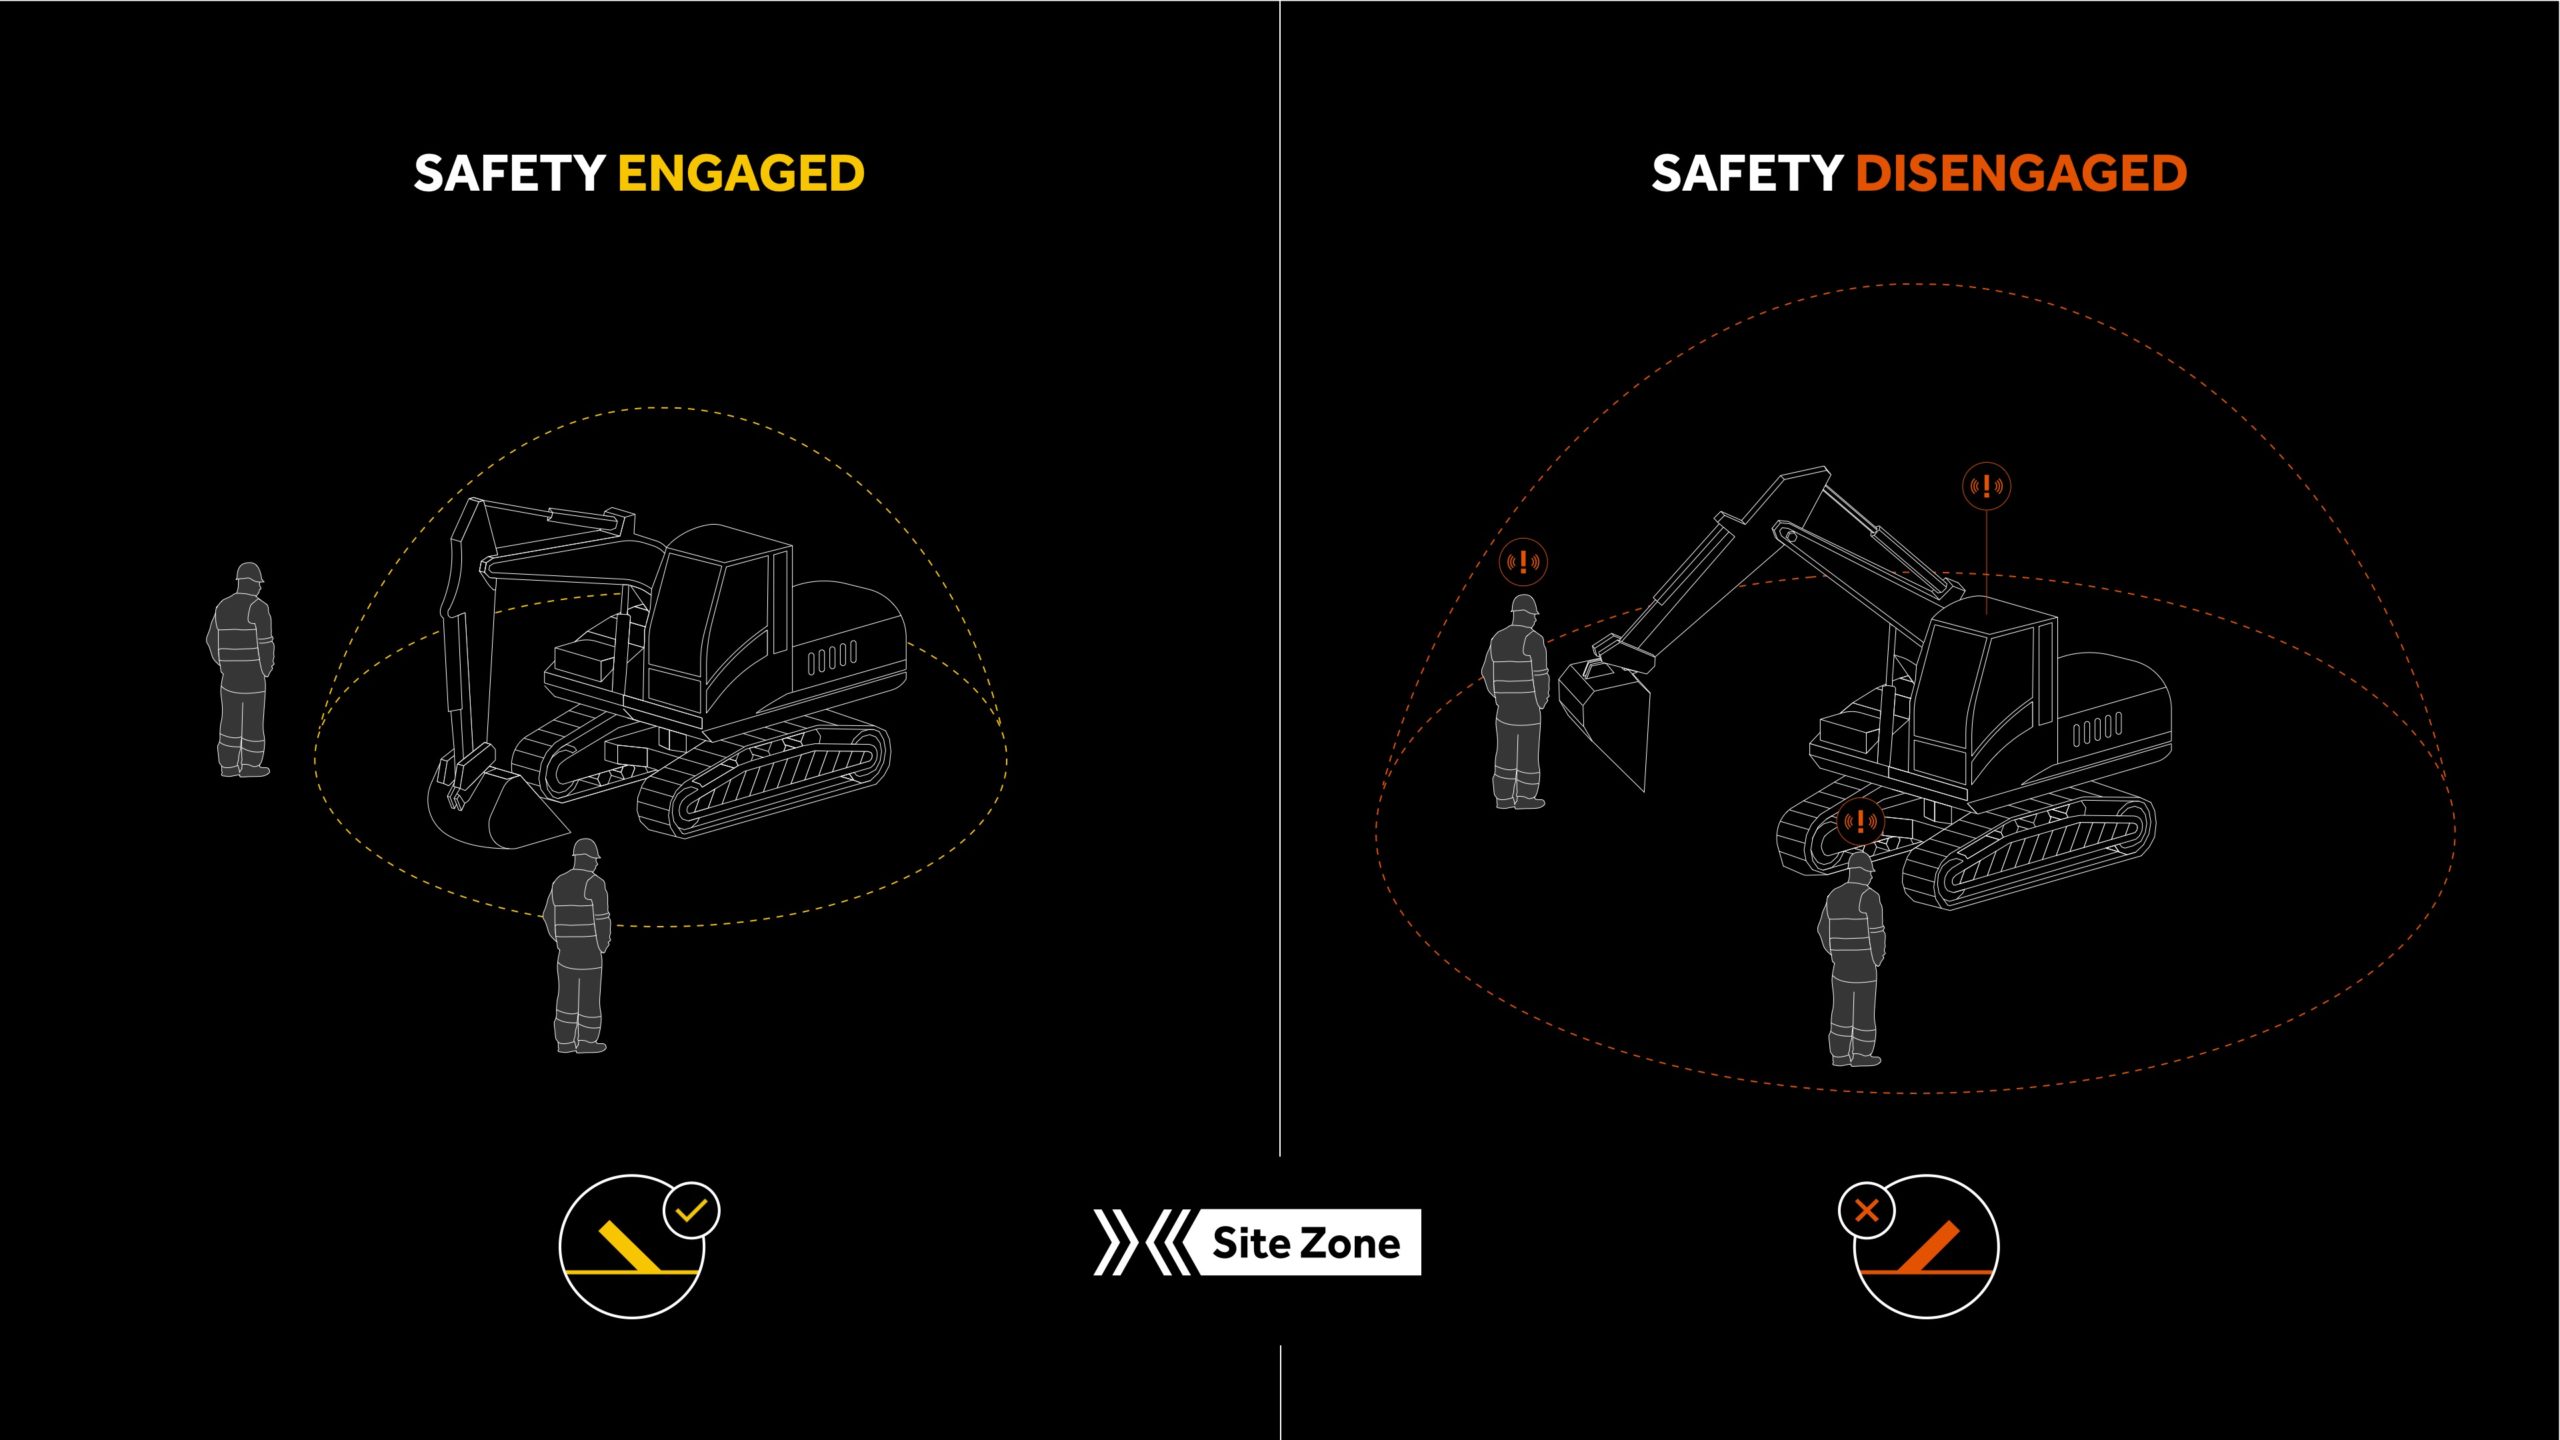 SiteZone Safety’s SmartBubble technology to be installed as standard on all new excavator systems